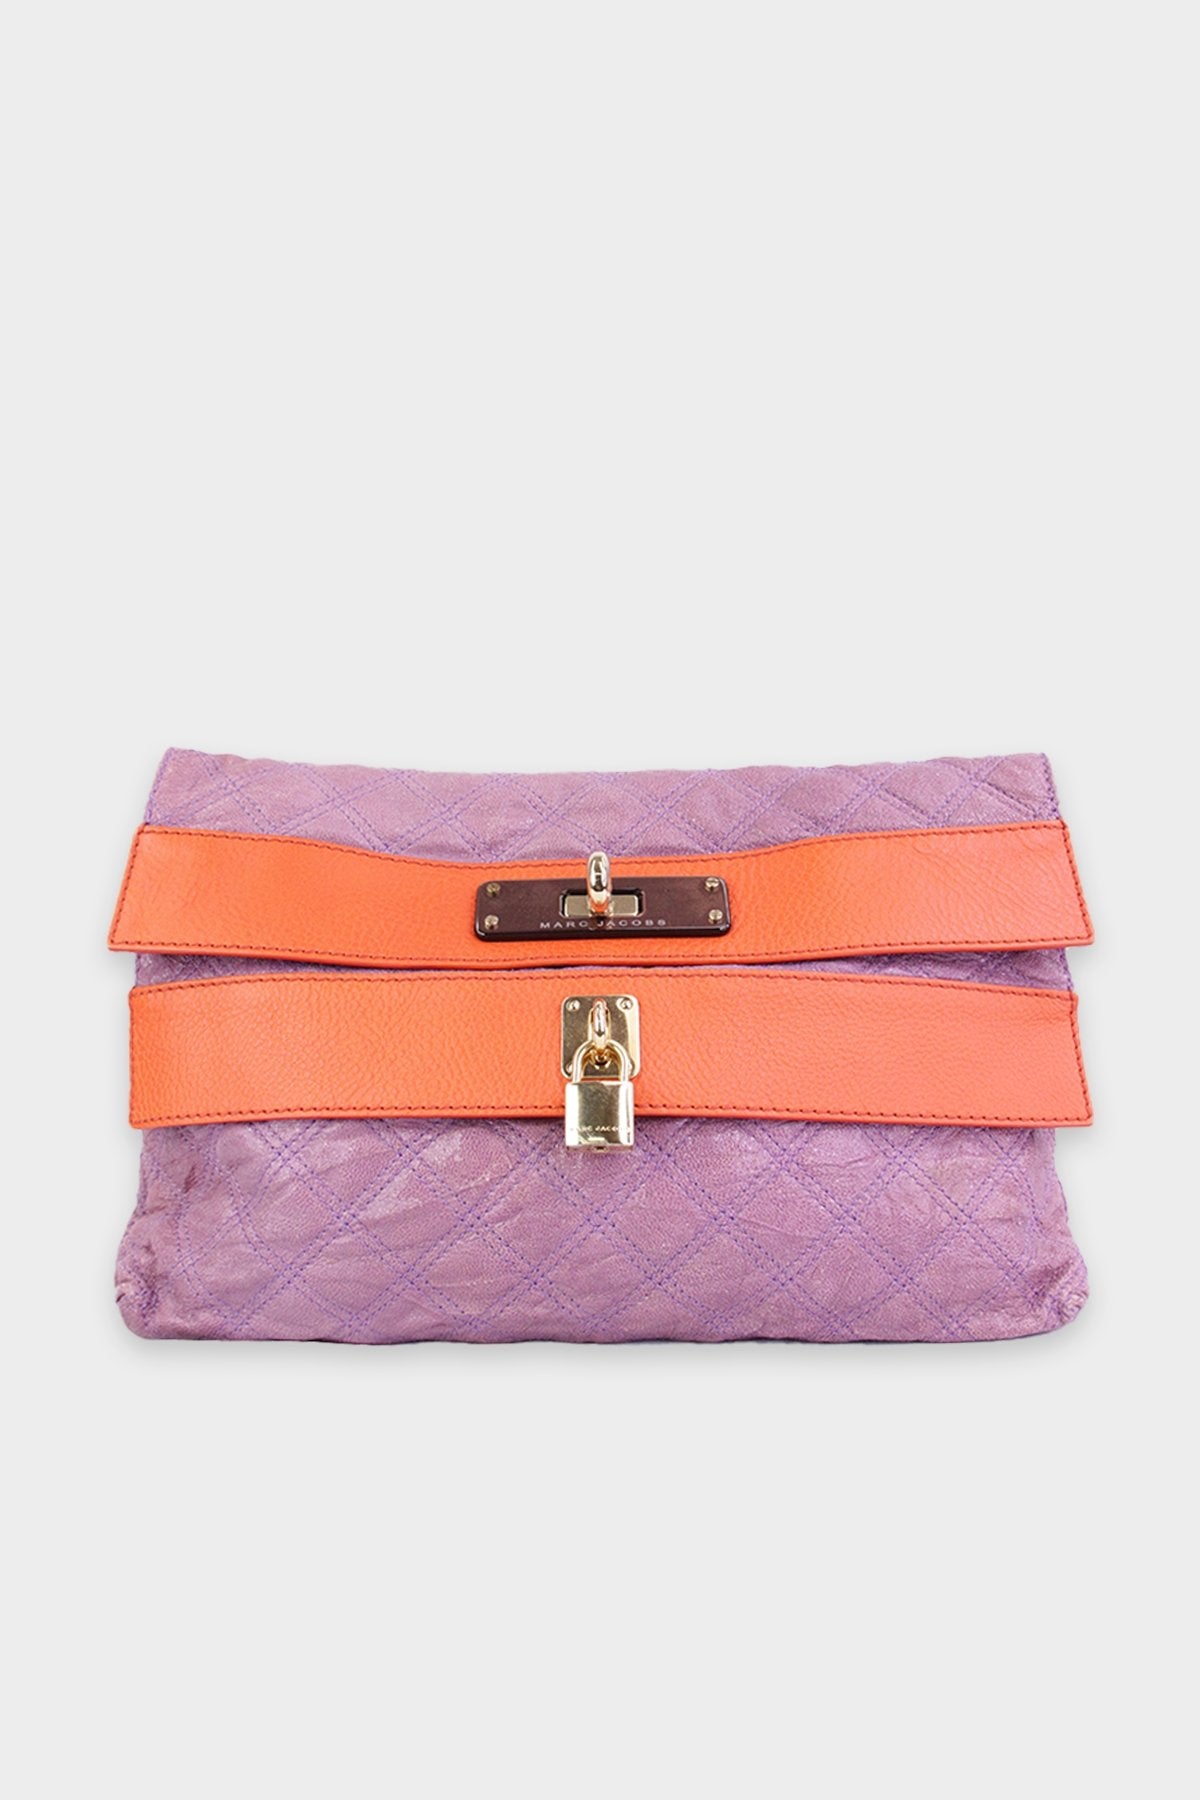 Marc by Marc Jacobs Leather Purple Clutch Purse  Marc jacobs leather,  Purple clutch, Marc jacobs clutch